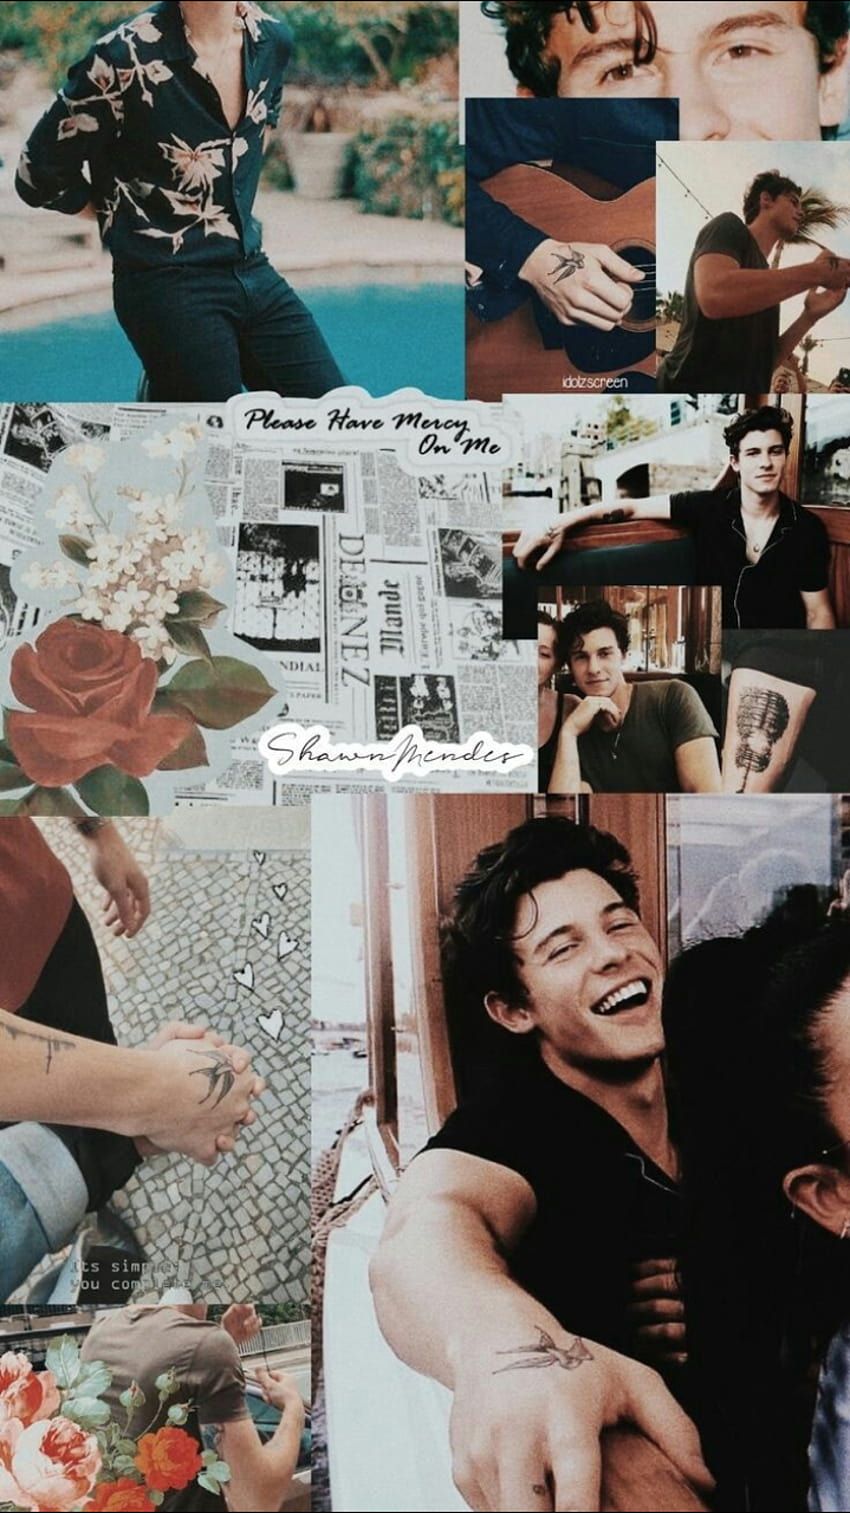 Shawn Mendes aesthetic wallpaper. - Shawn Mendes